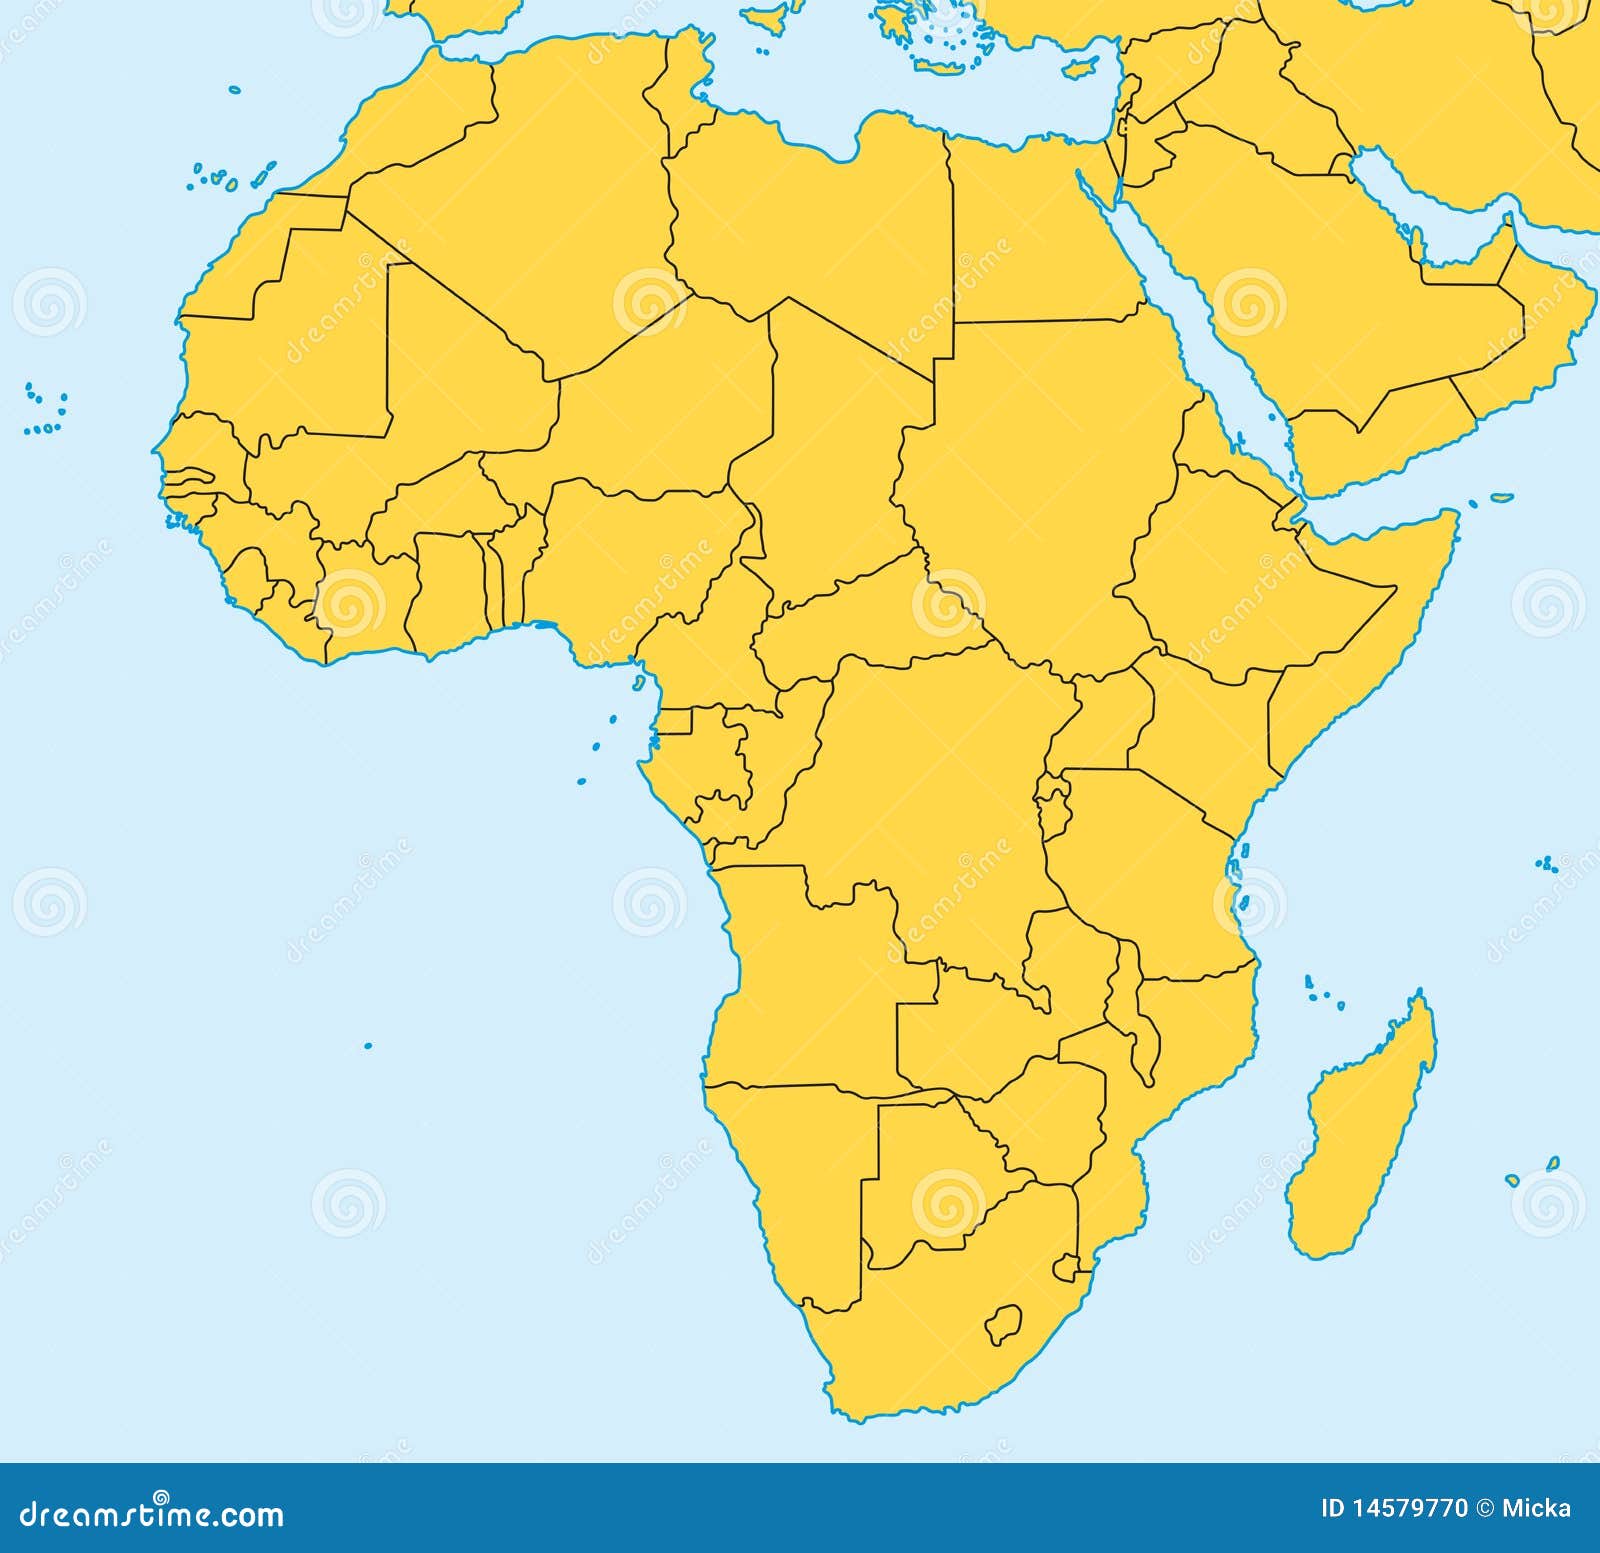 free clipart map of africa - photo #42